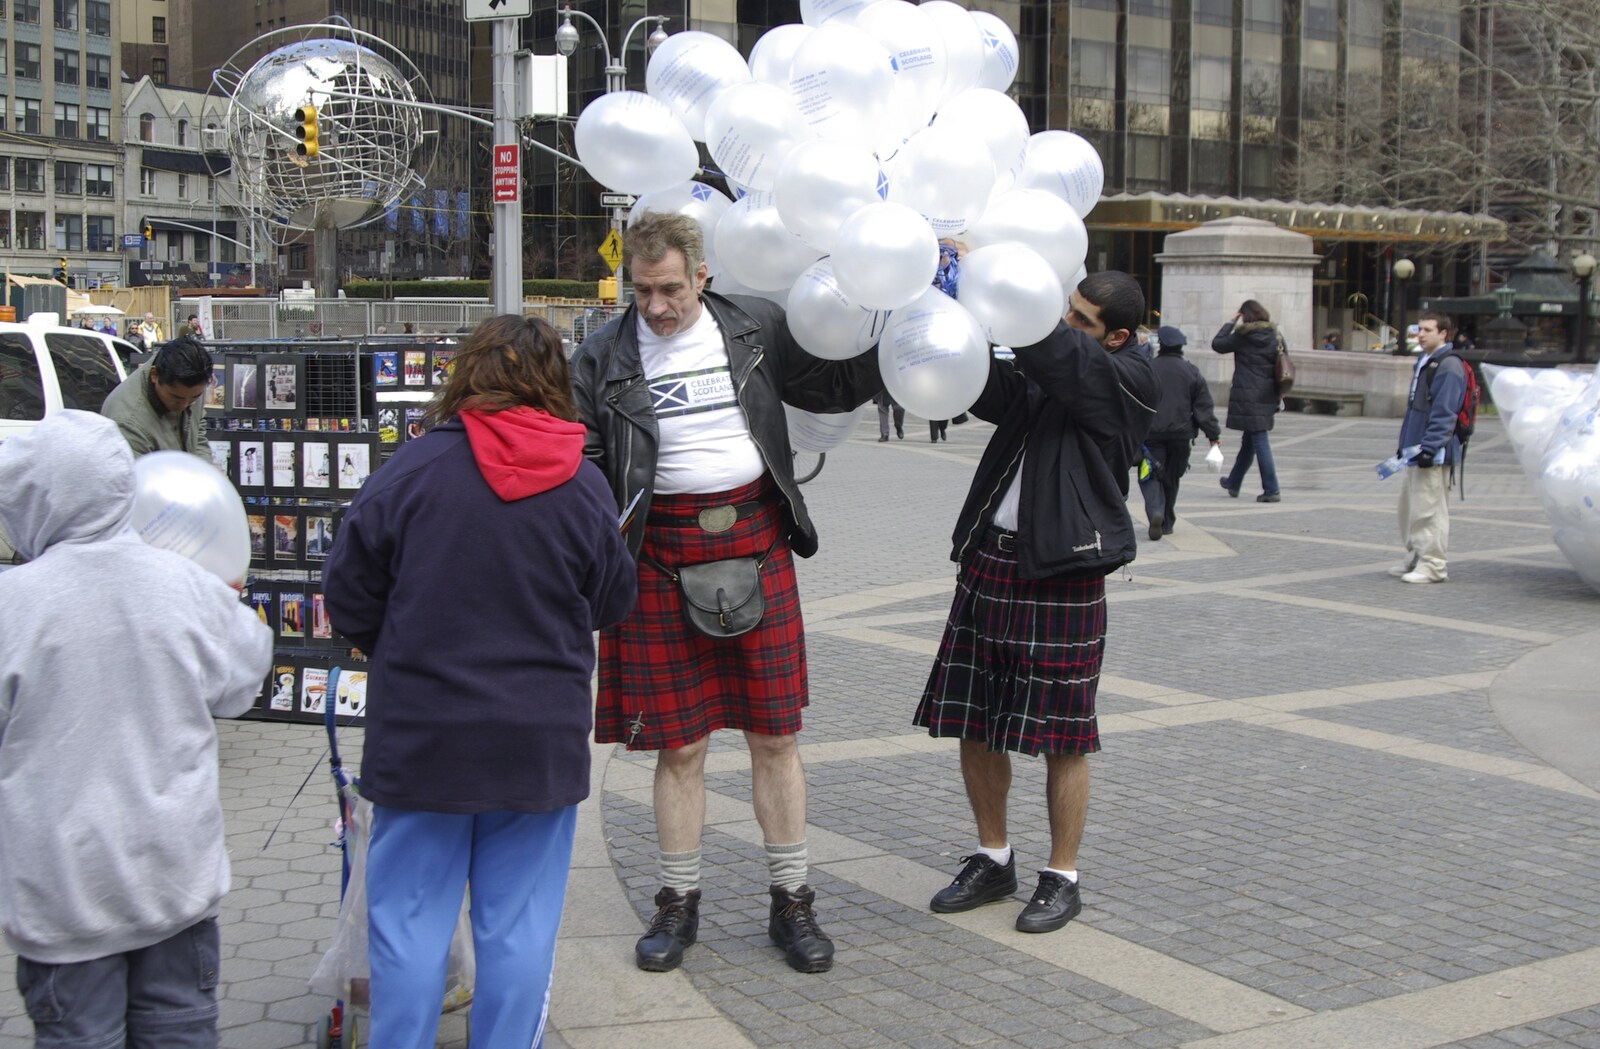 Men in kilts hand out balloons on Columbus Circle from A Central Park Marathon, Les Paul at the Iridium Club and an Empire State Sunset, New York, US - 25th March 2007